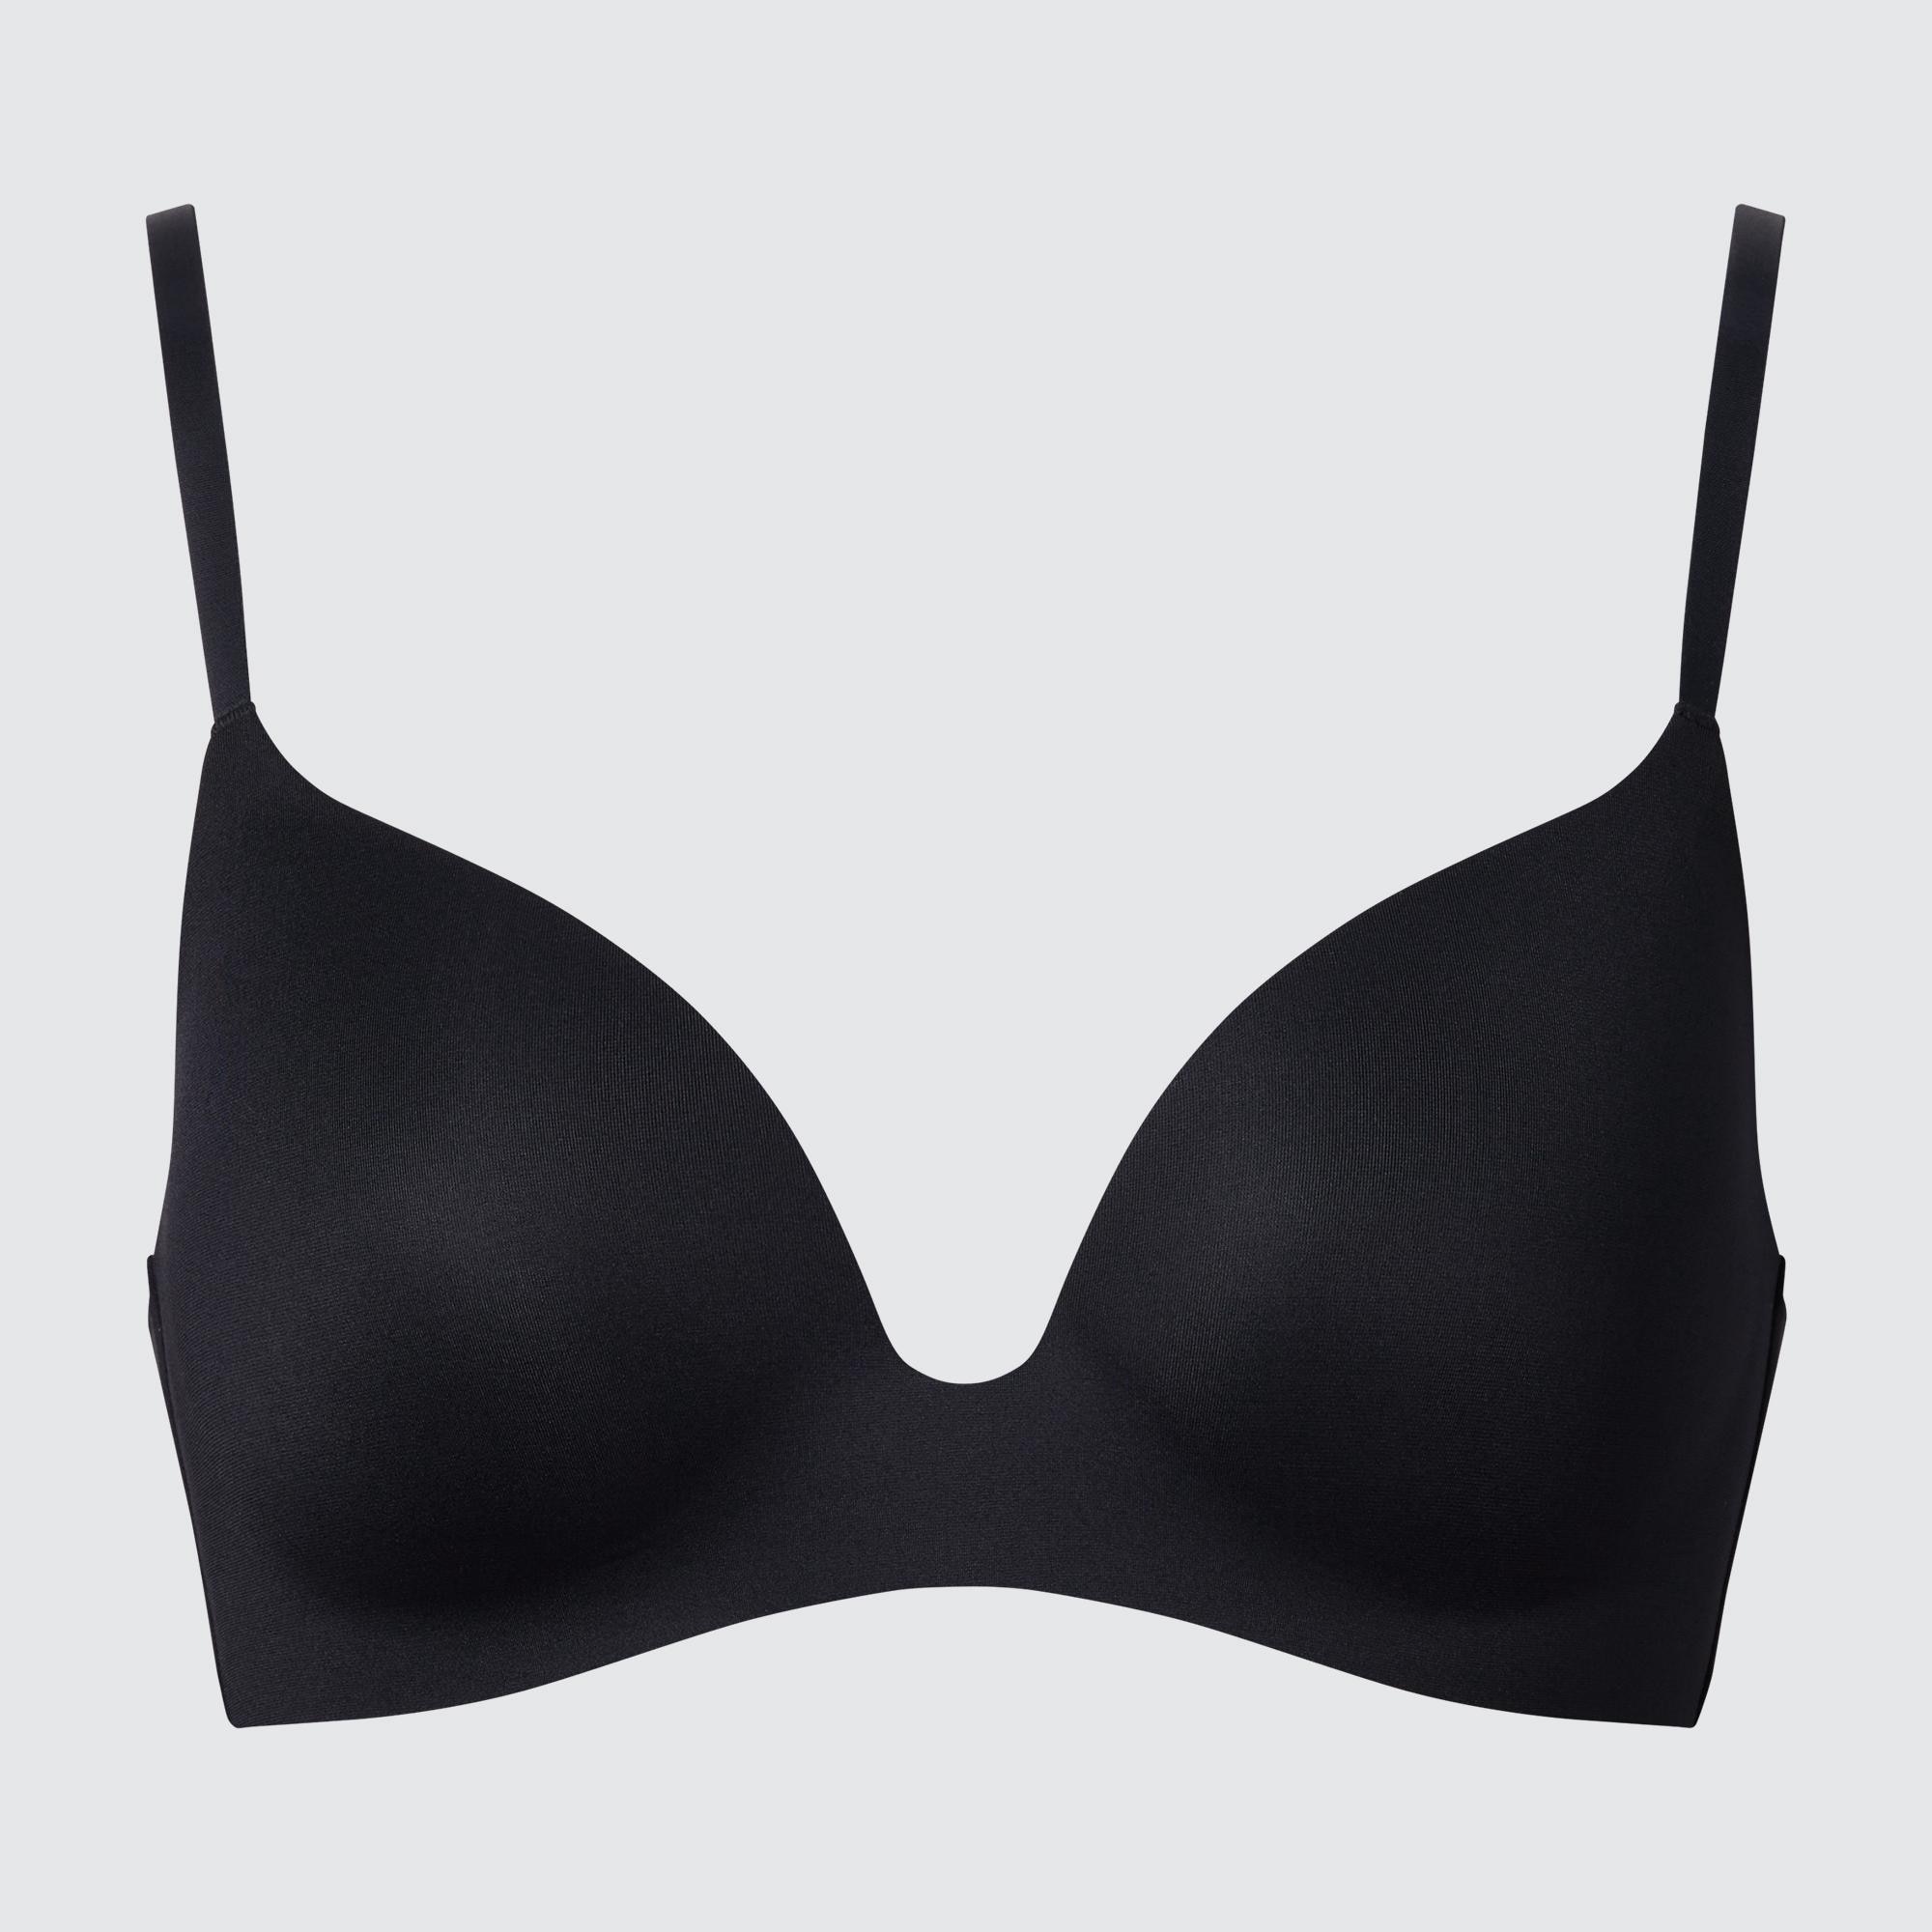 Uniqlo 3D Hold Wireless Bra Black - $20 (33% Off Retail) New With Tags -  From Jess